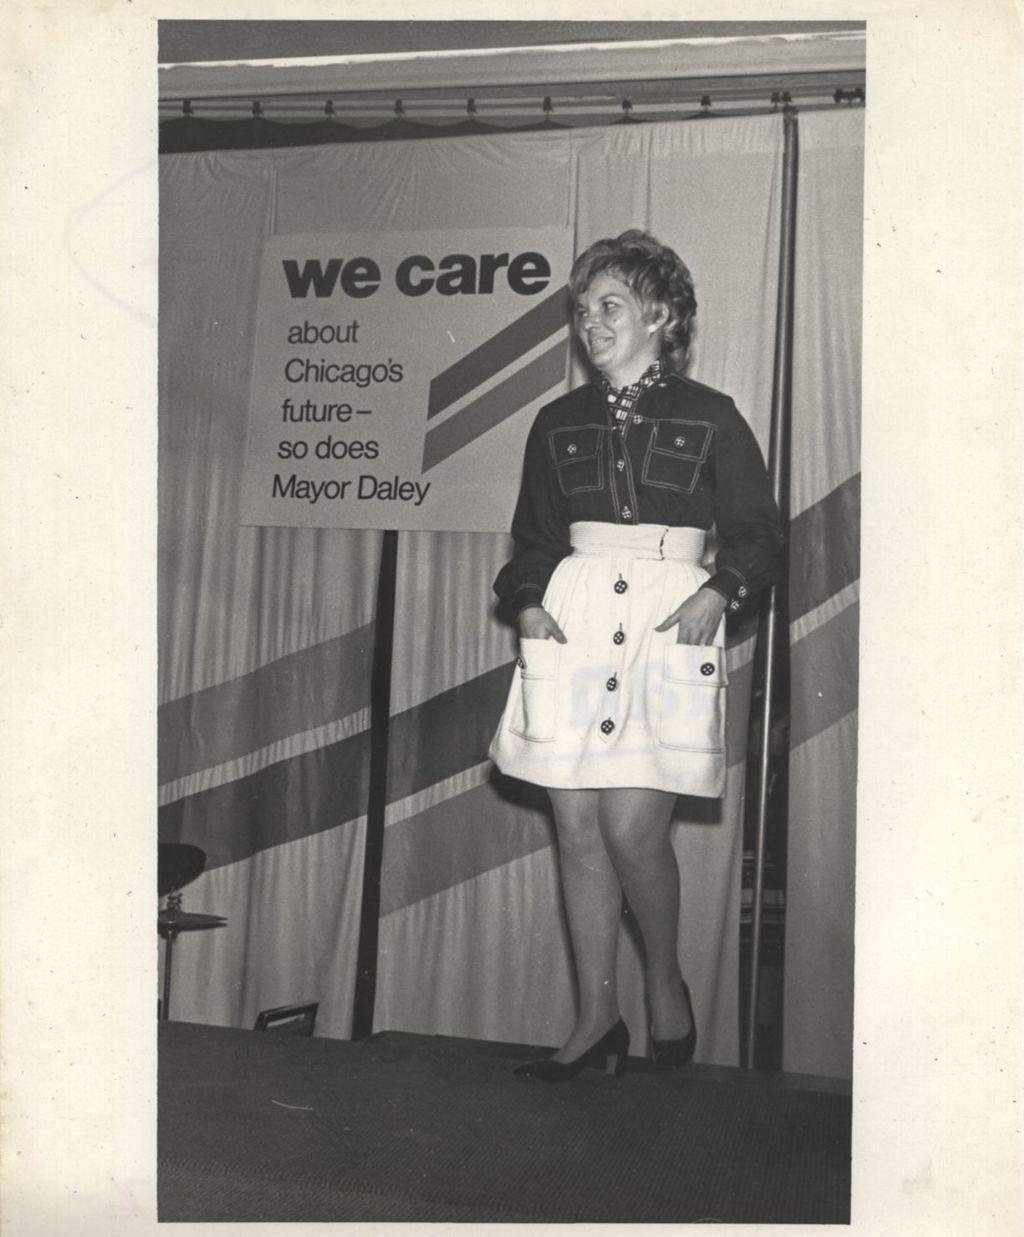 Miniature of Eleanor R. Daley modeling an outfit at a "We Care" event